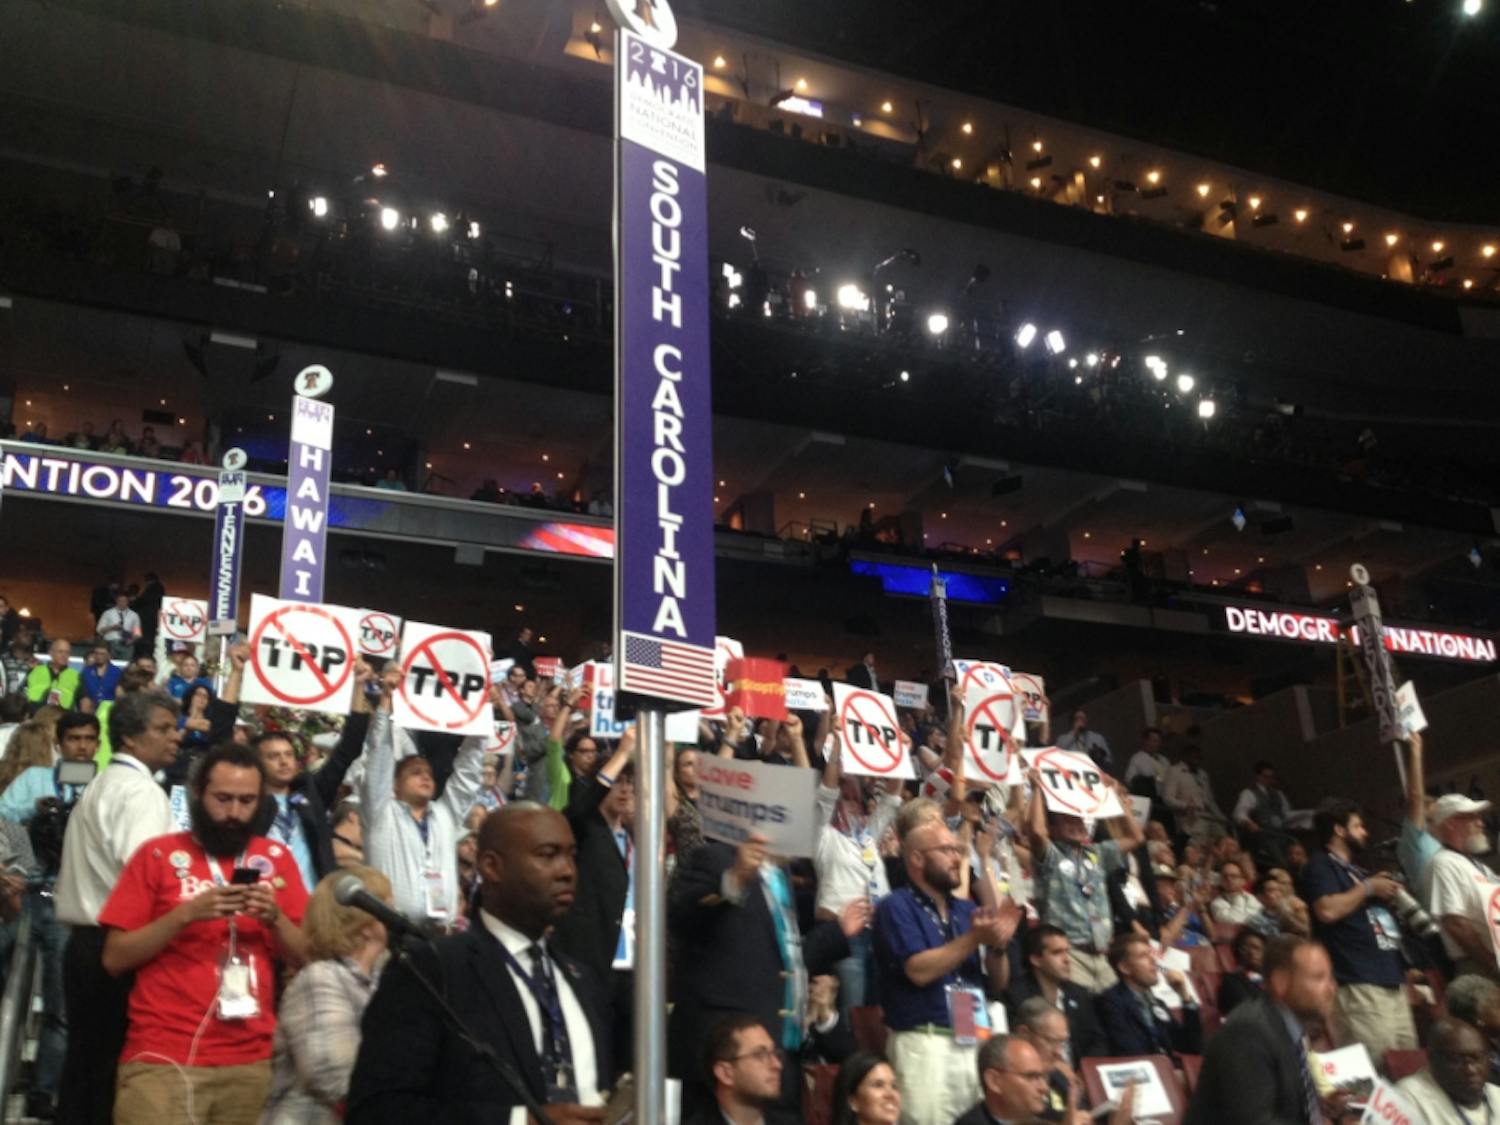 Members of the South Carolina delegation listen to speakers on the first day of the Democratic National Convention in Philadelphia on July 25, 2016. 